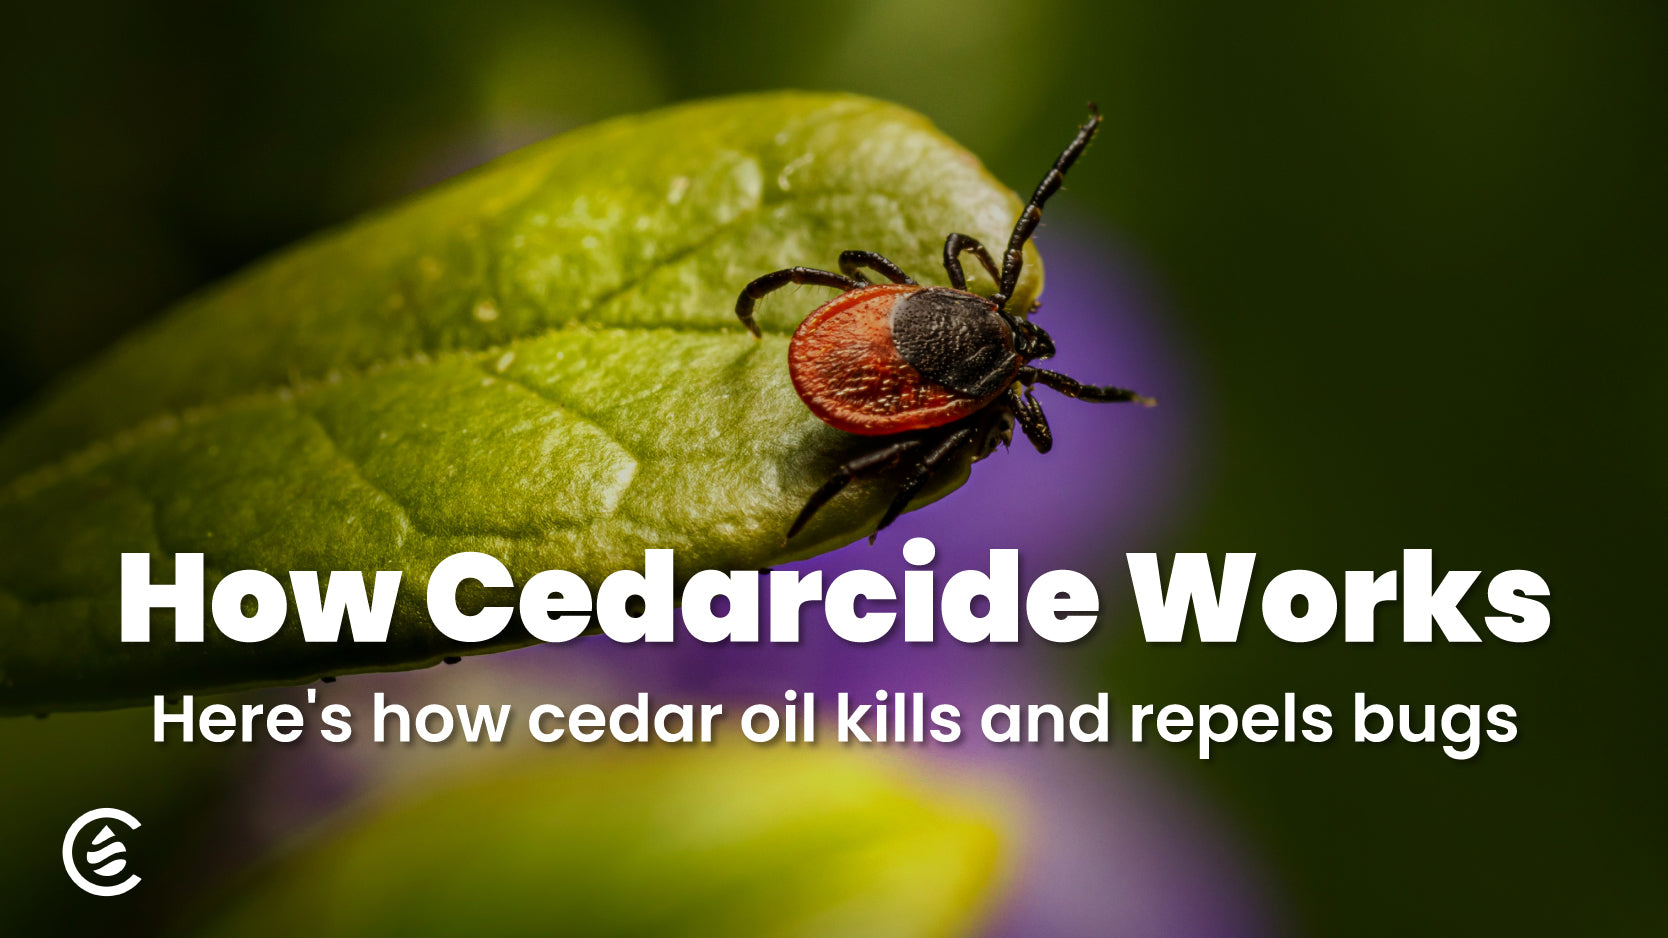 How Cedarcide Works to Kill Bugs